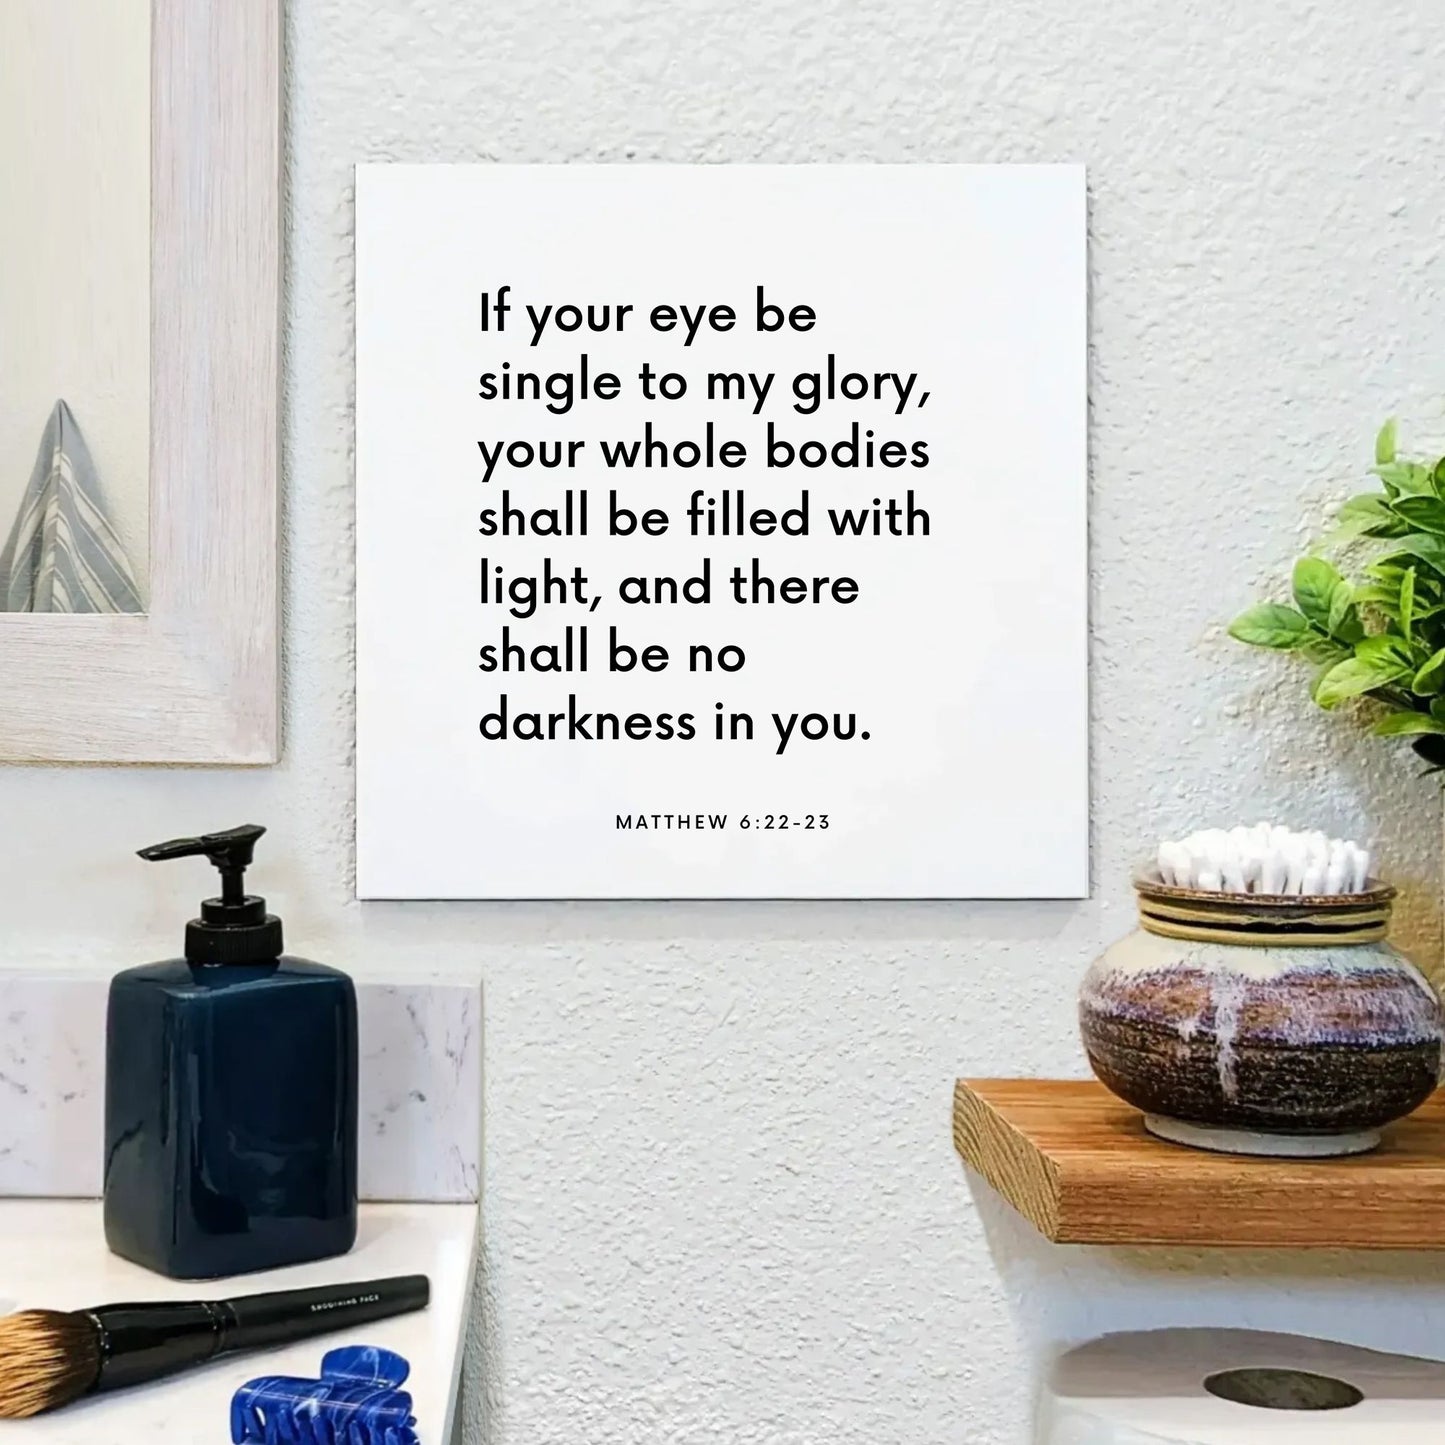 Bathroom mouting of the scripture tile for Matthew 6:22-23 - "If your eye be single to my glory"